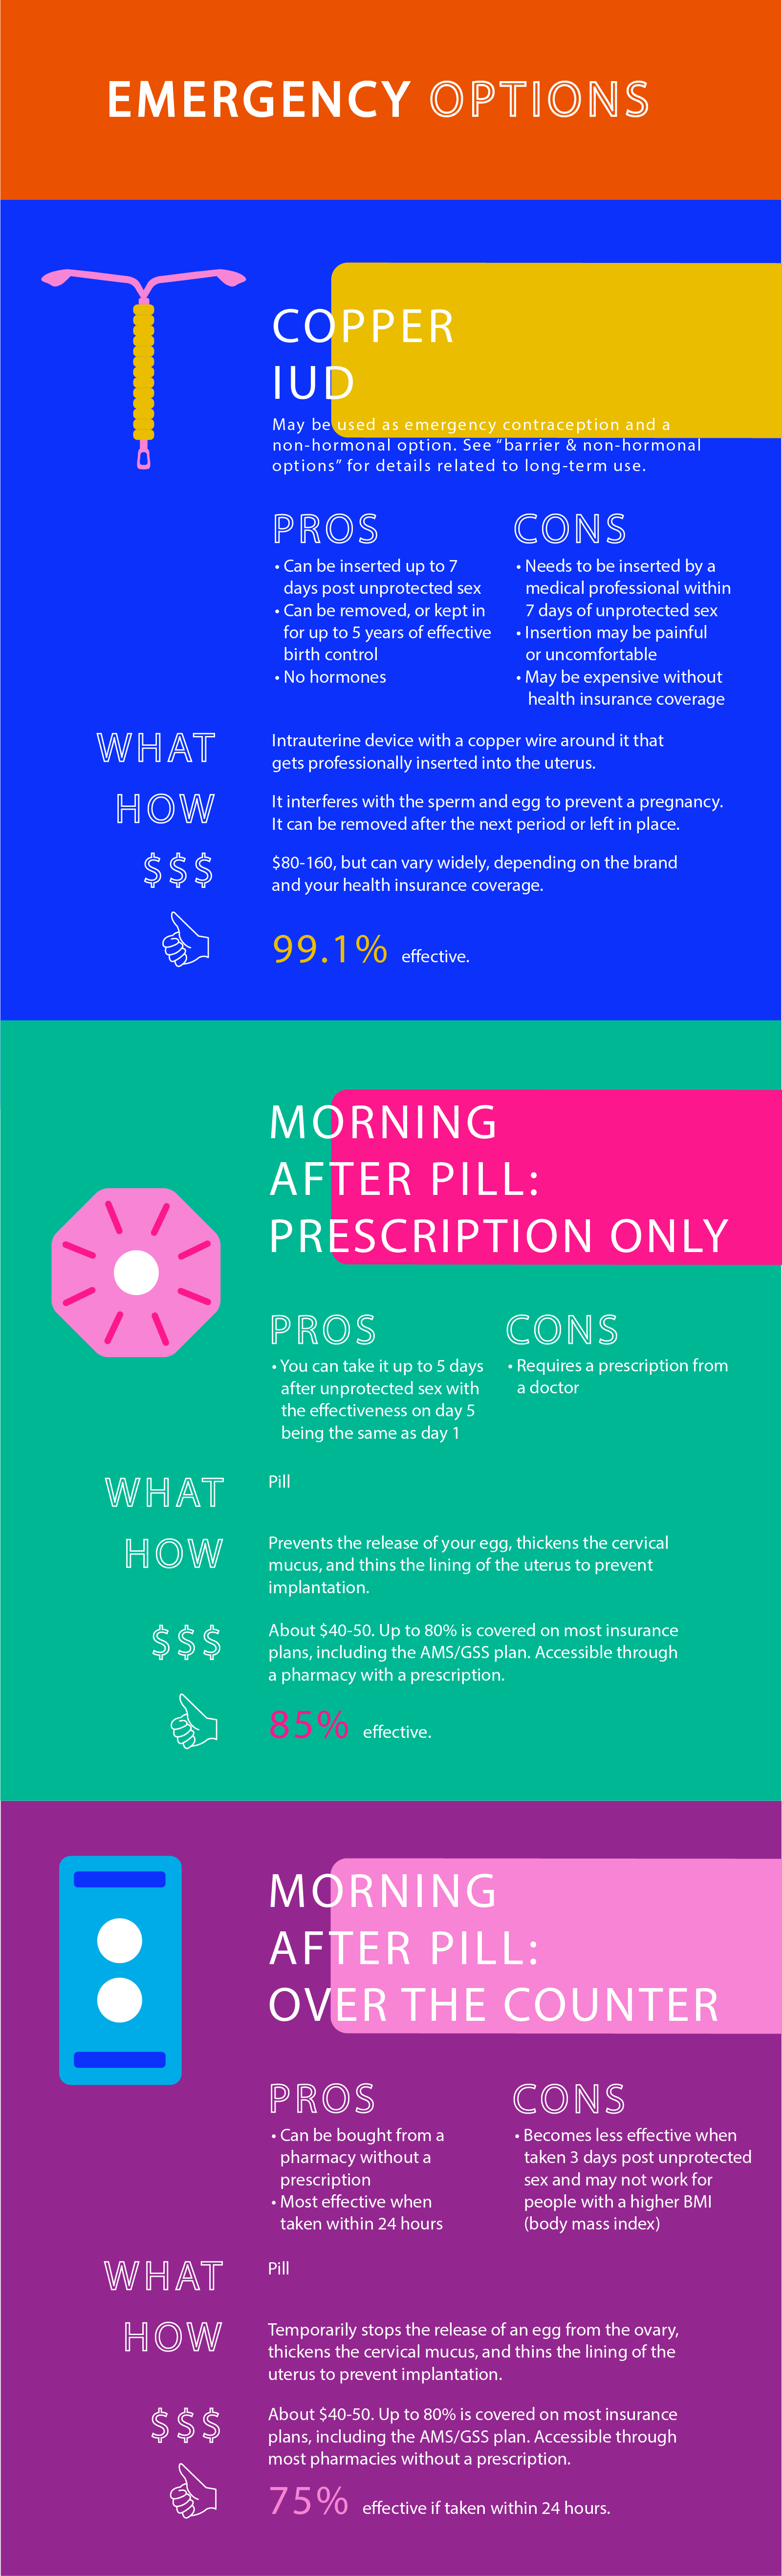 Emergency contraception options